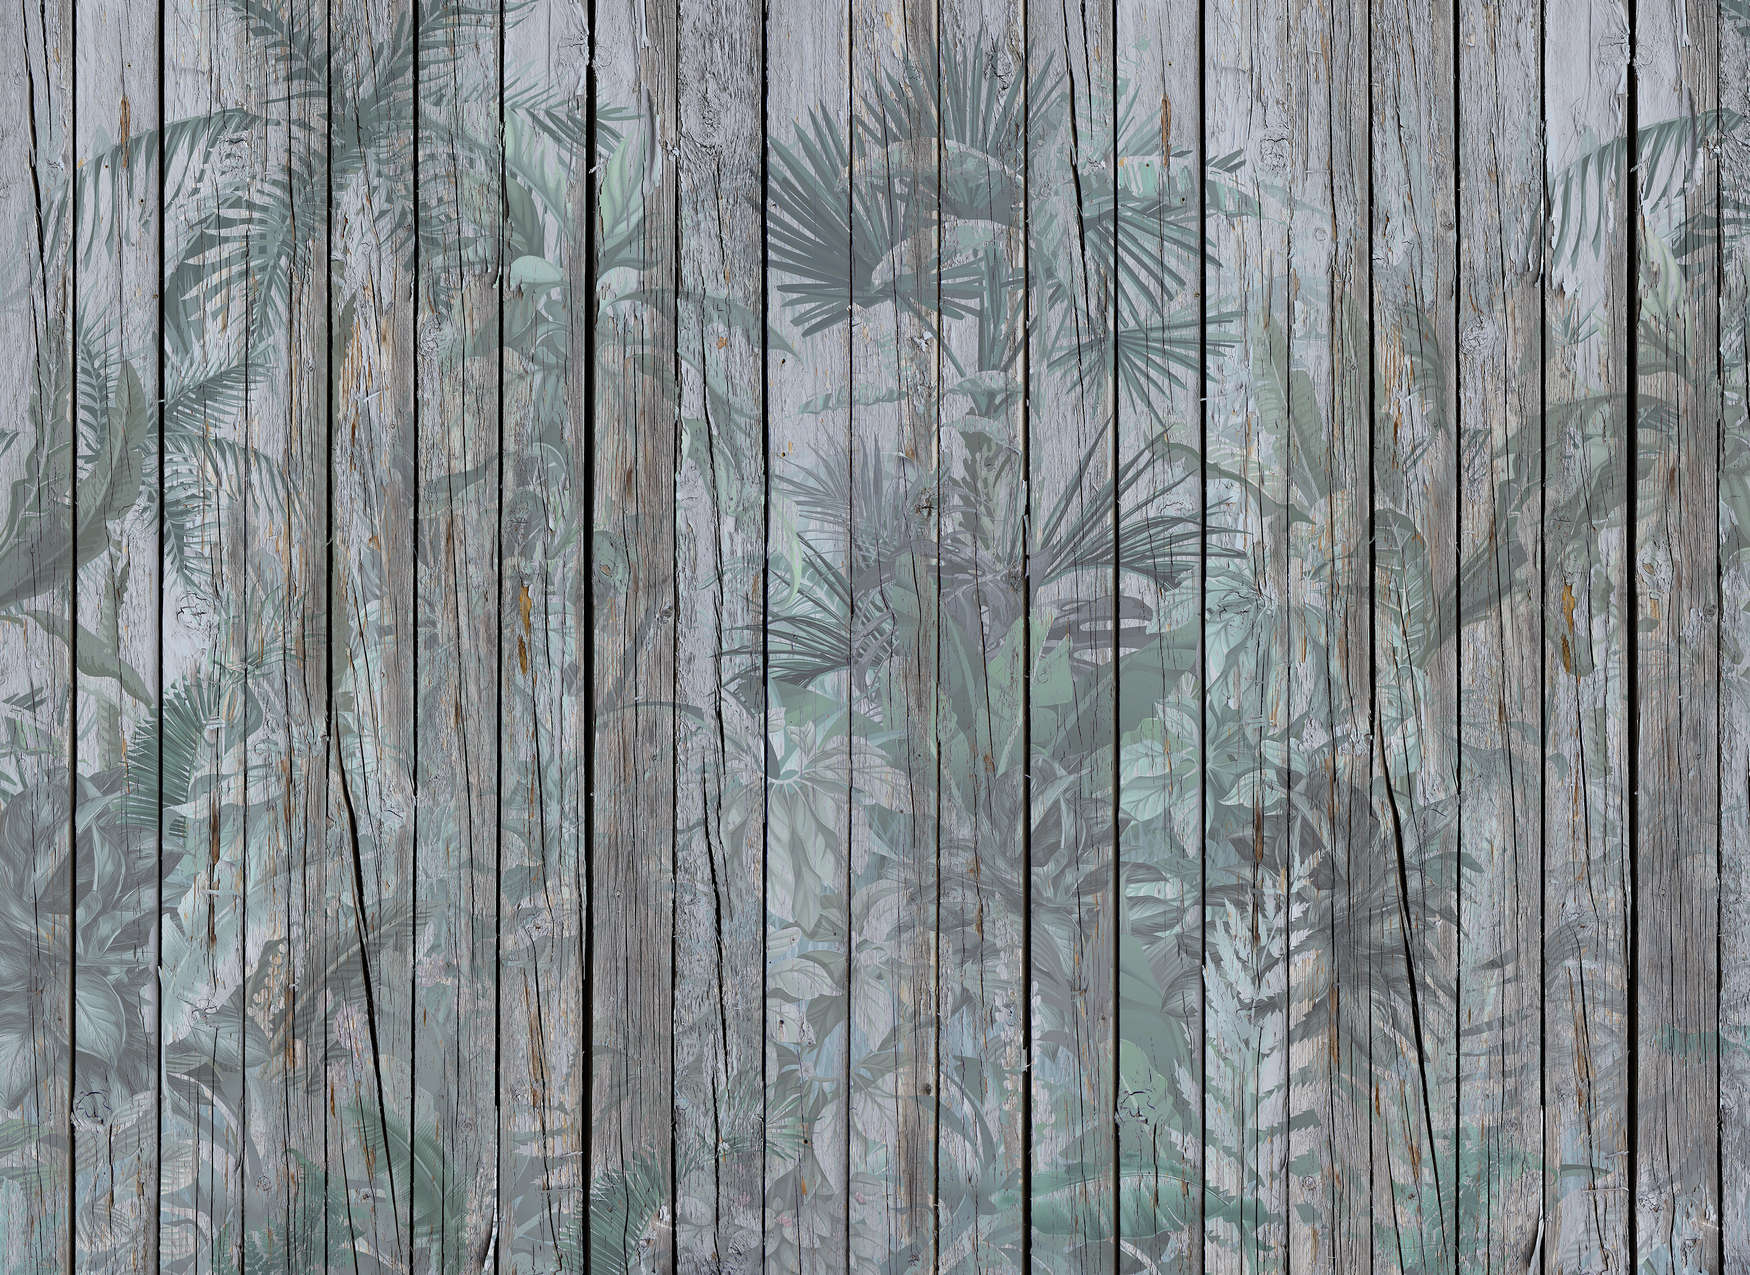             Wooden Wall Mural with Jungle Plants - Brown, Green
        